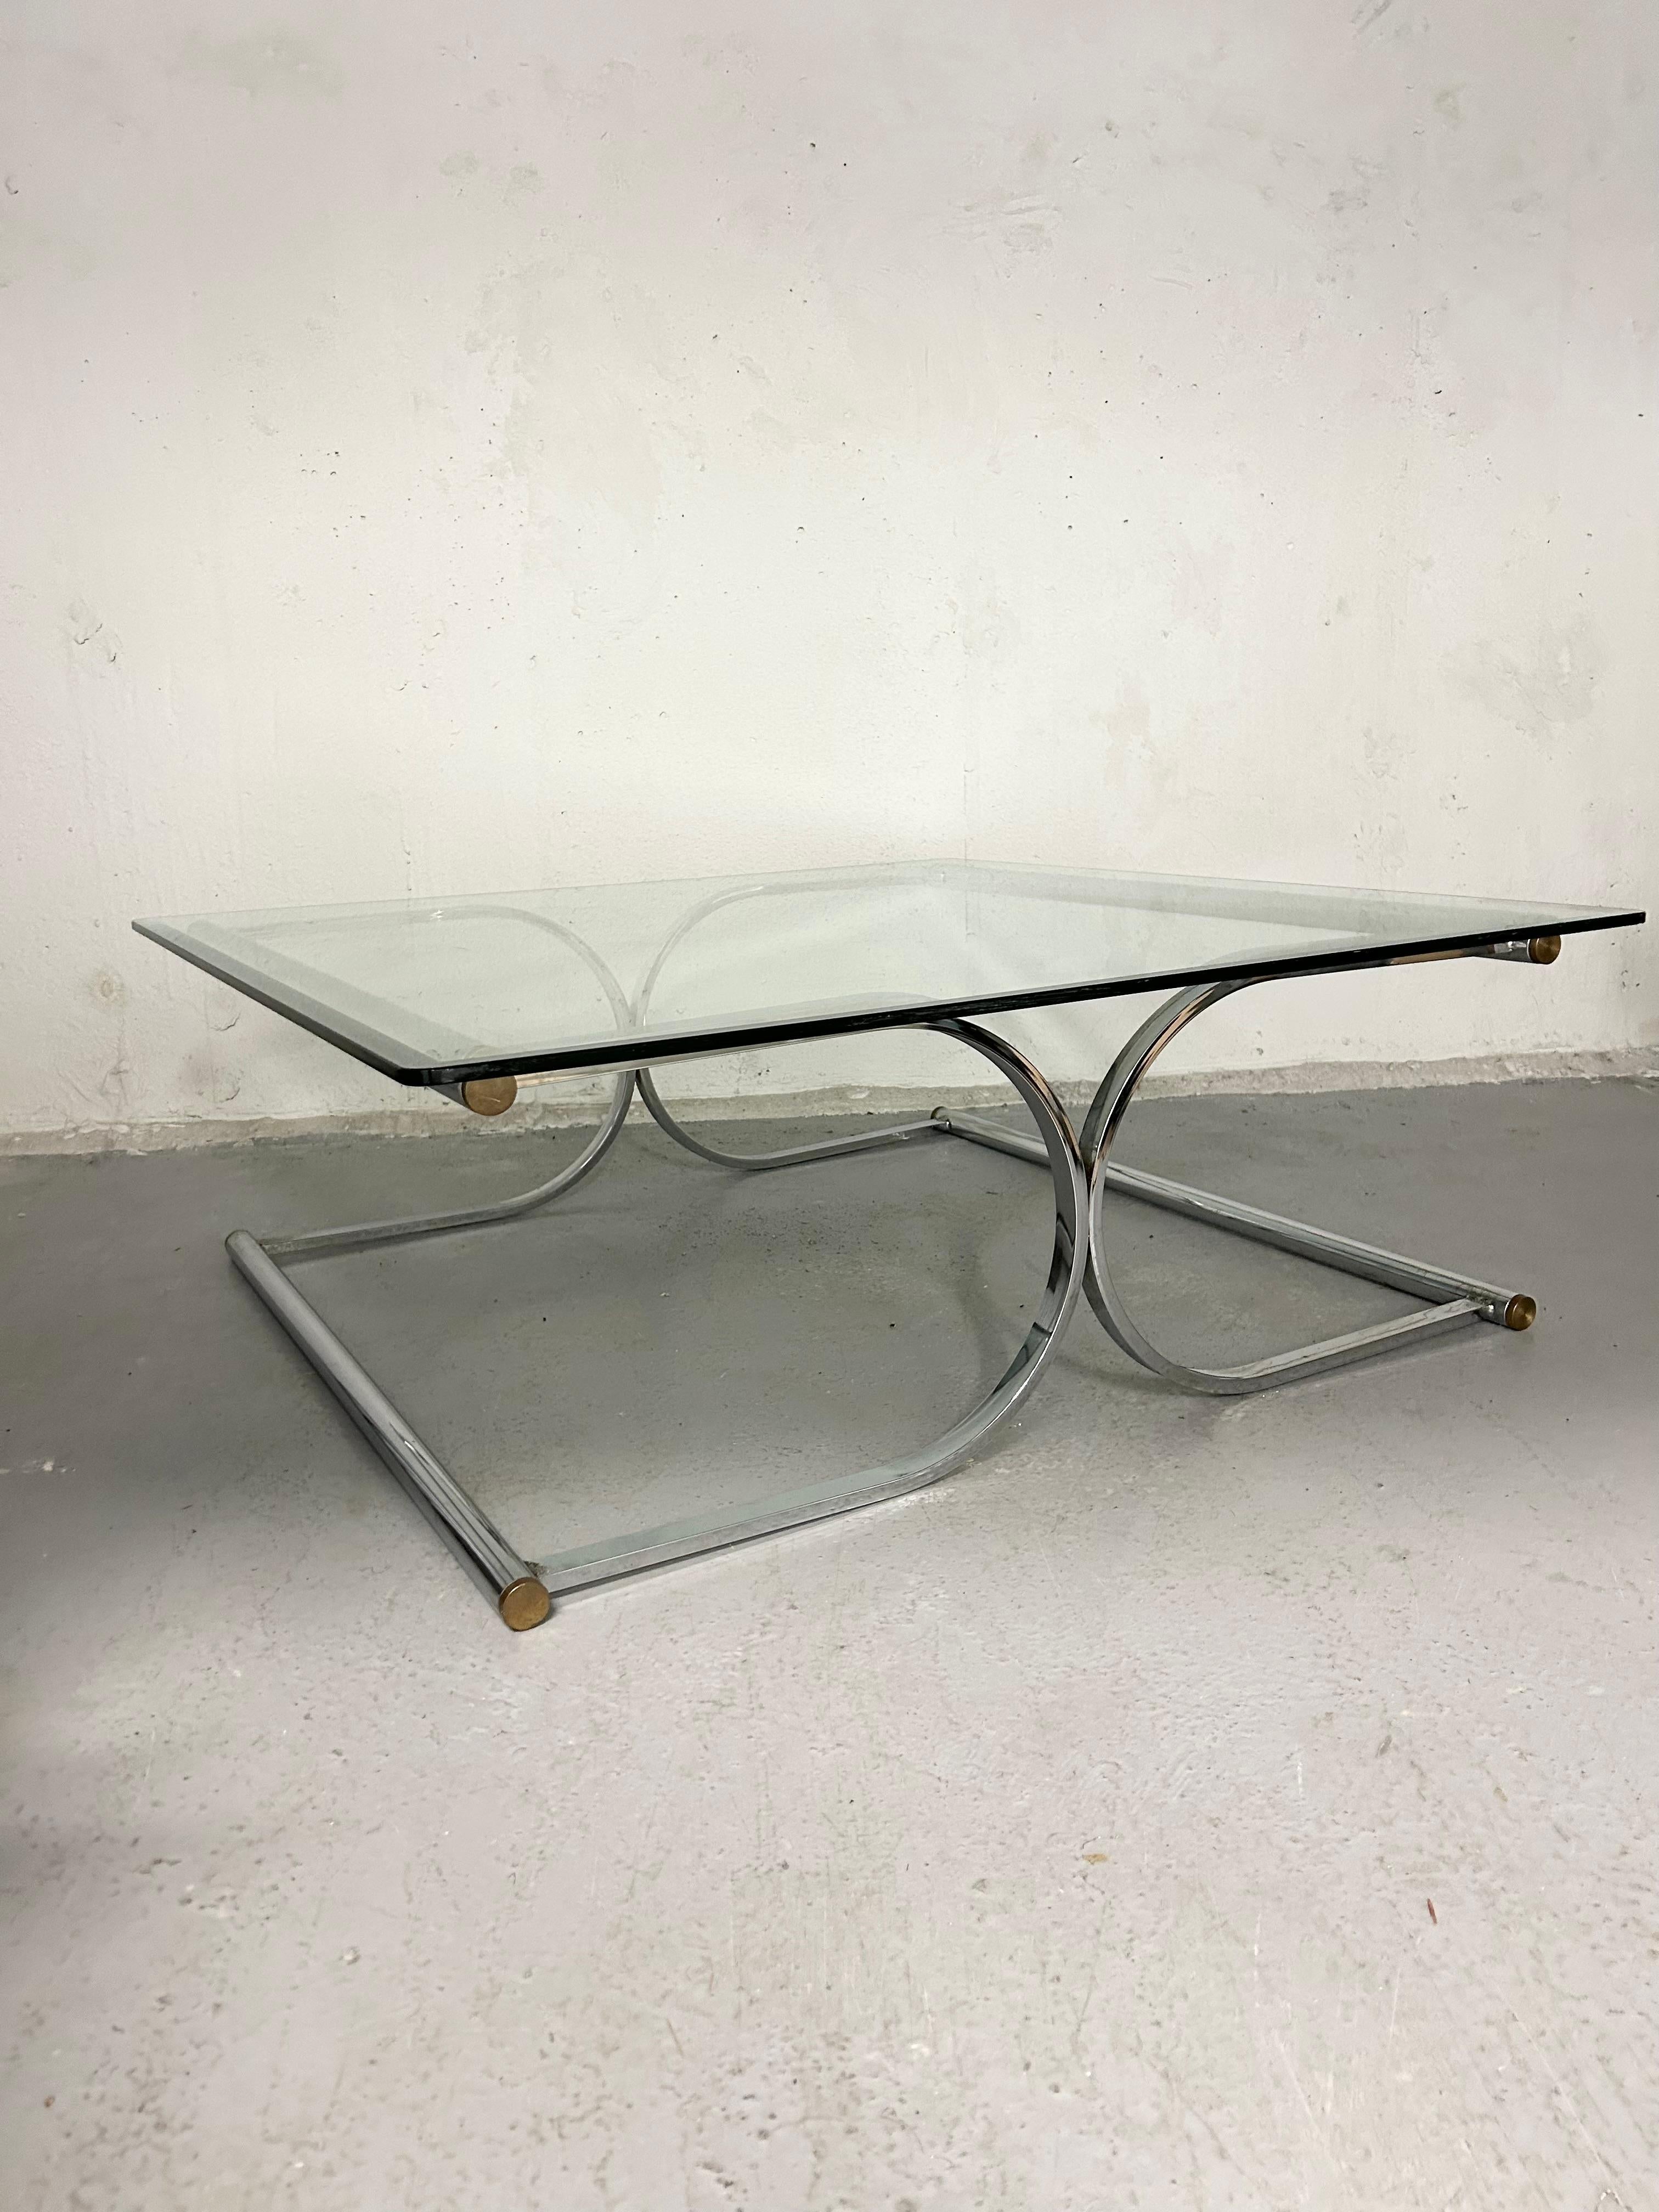 Vintage chrome and glass cantilever coffee table. Base is sculptural - made of tubular chrome and has brass end caps. Square glass top sits on top. Glass has beveled edge. Chrome base has minimal wear. Glass top has normal surface wear. One very